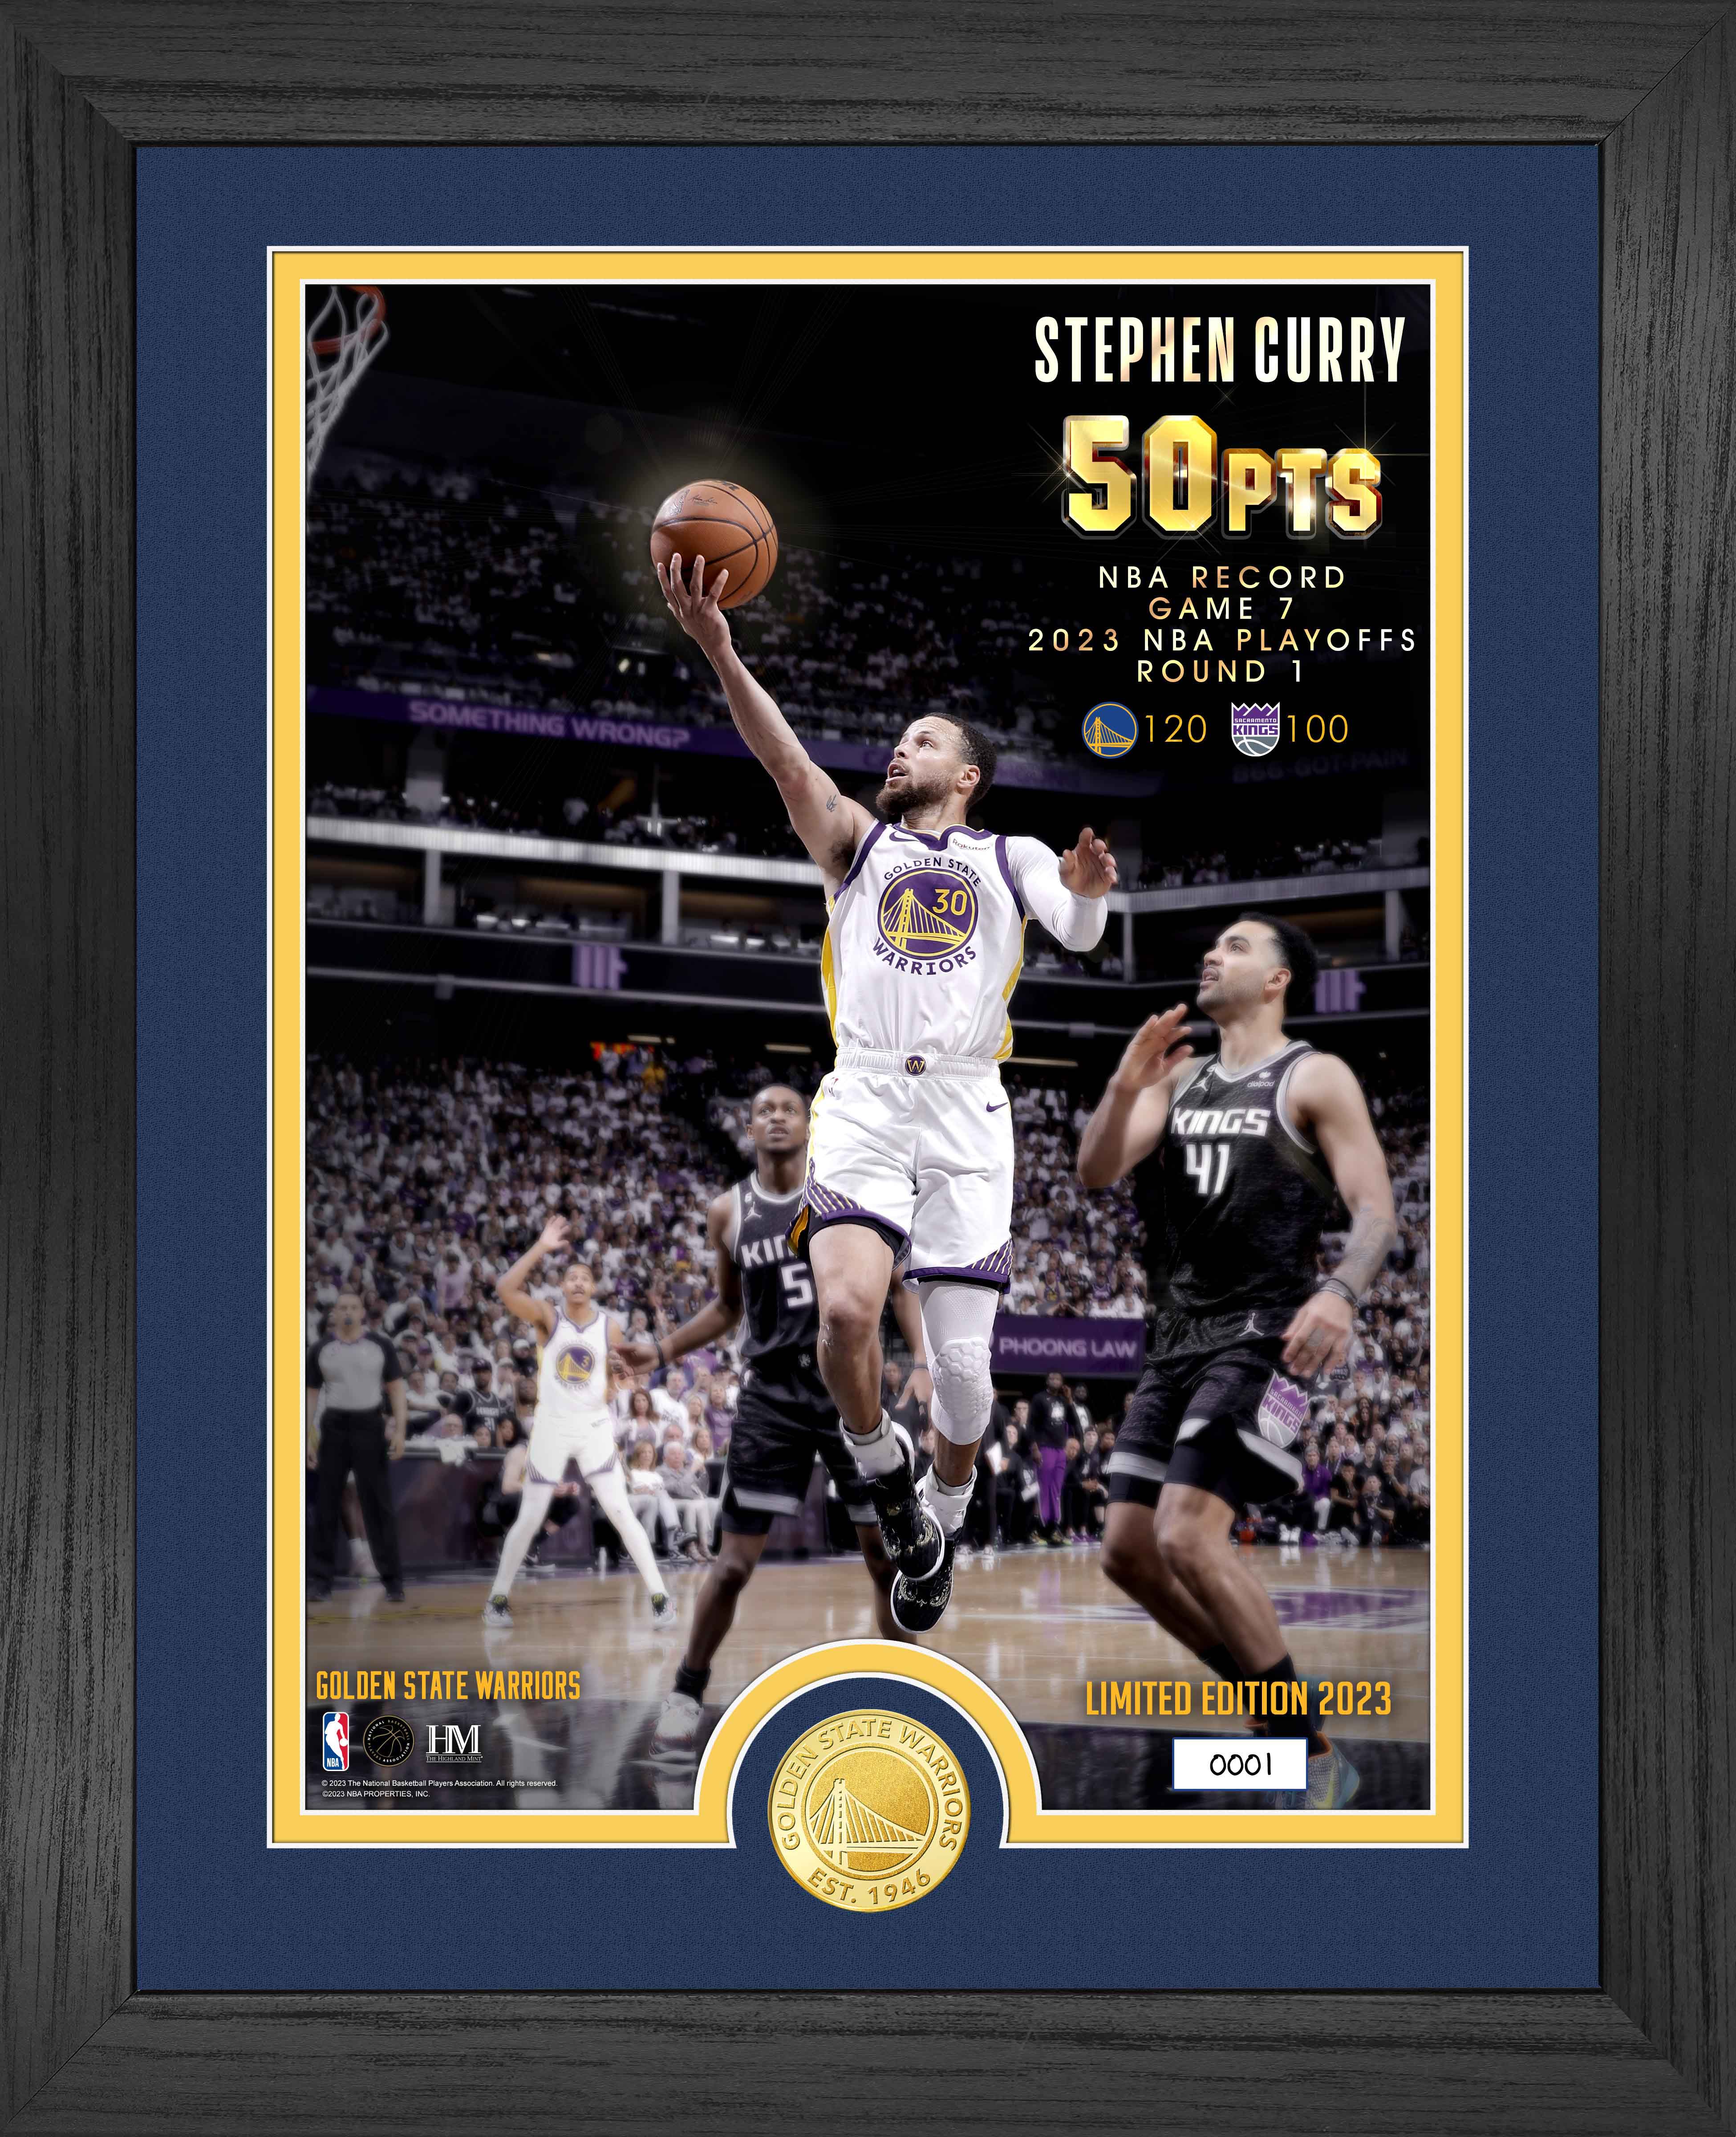 Steph Curry 50 Points Bronze Coin Photo Mint